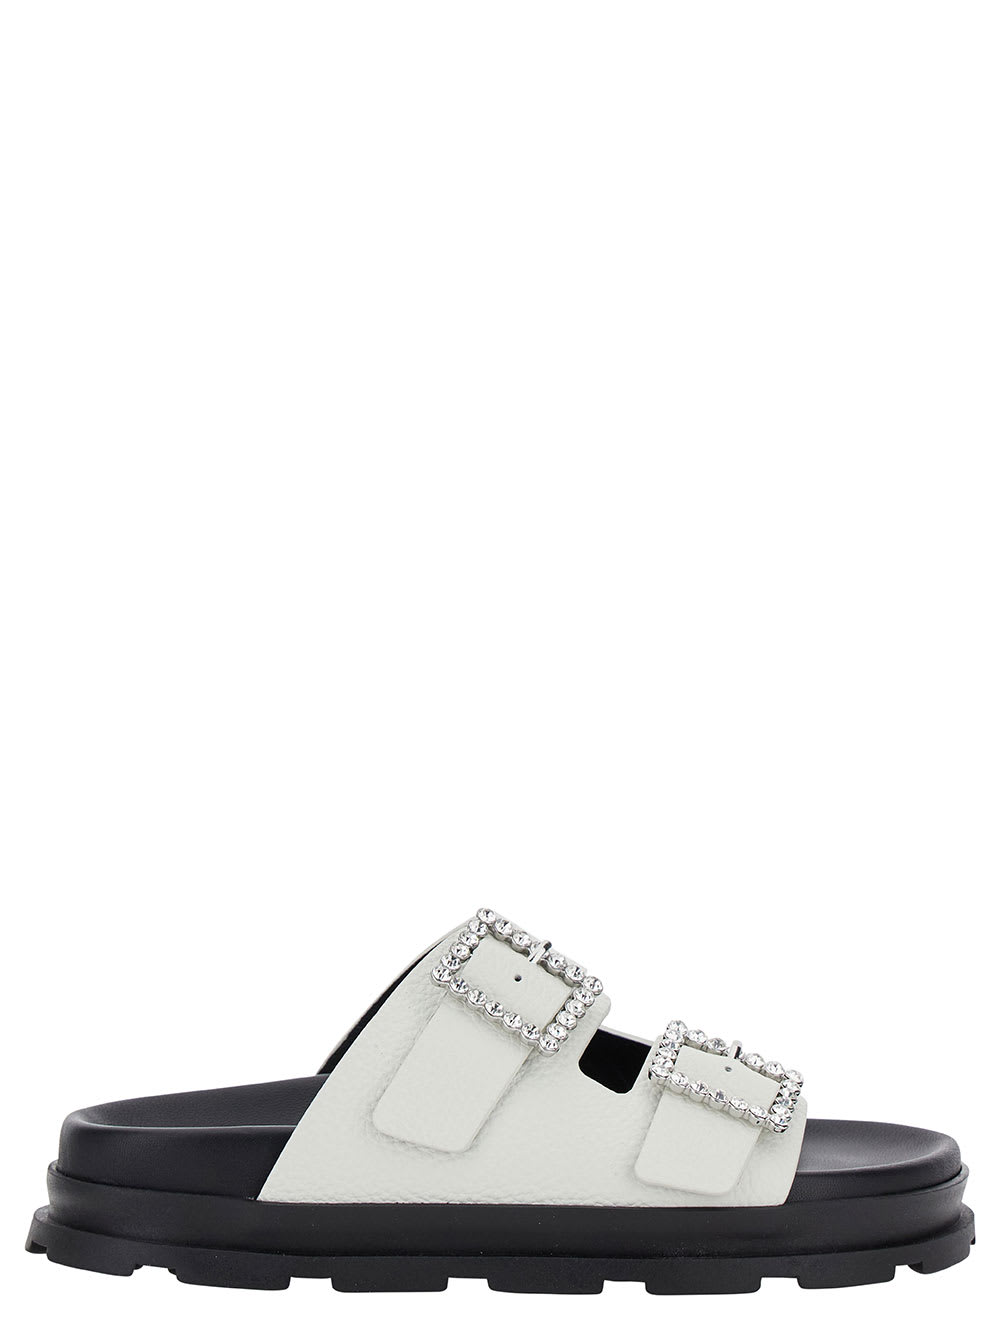 Shop Pollini White Sandals With Rhinestone Buckle In Hammered Leather Woman